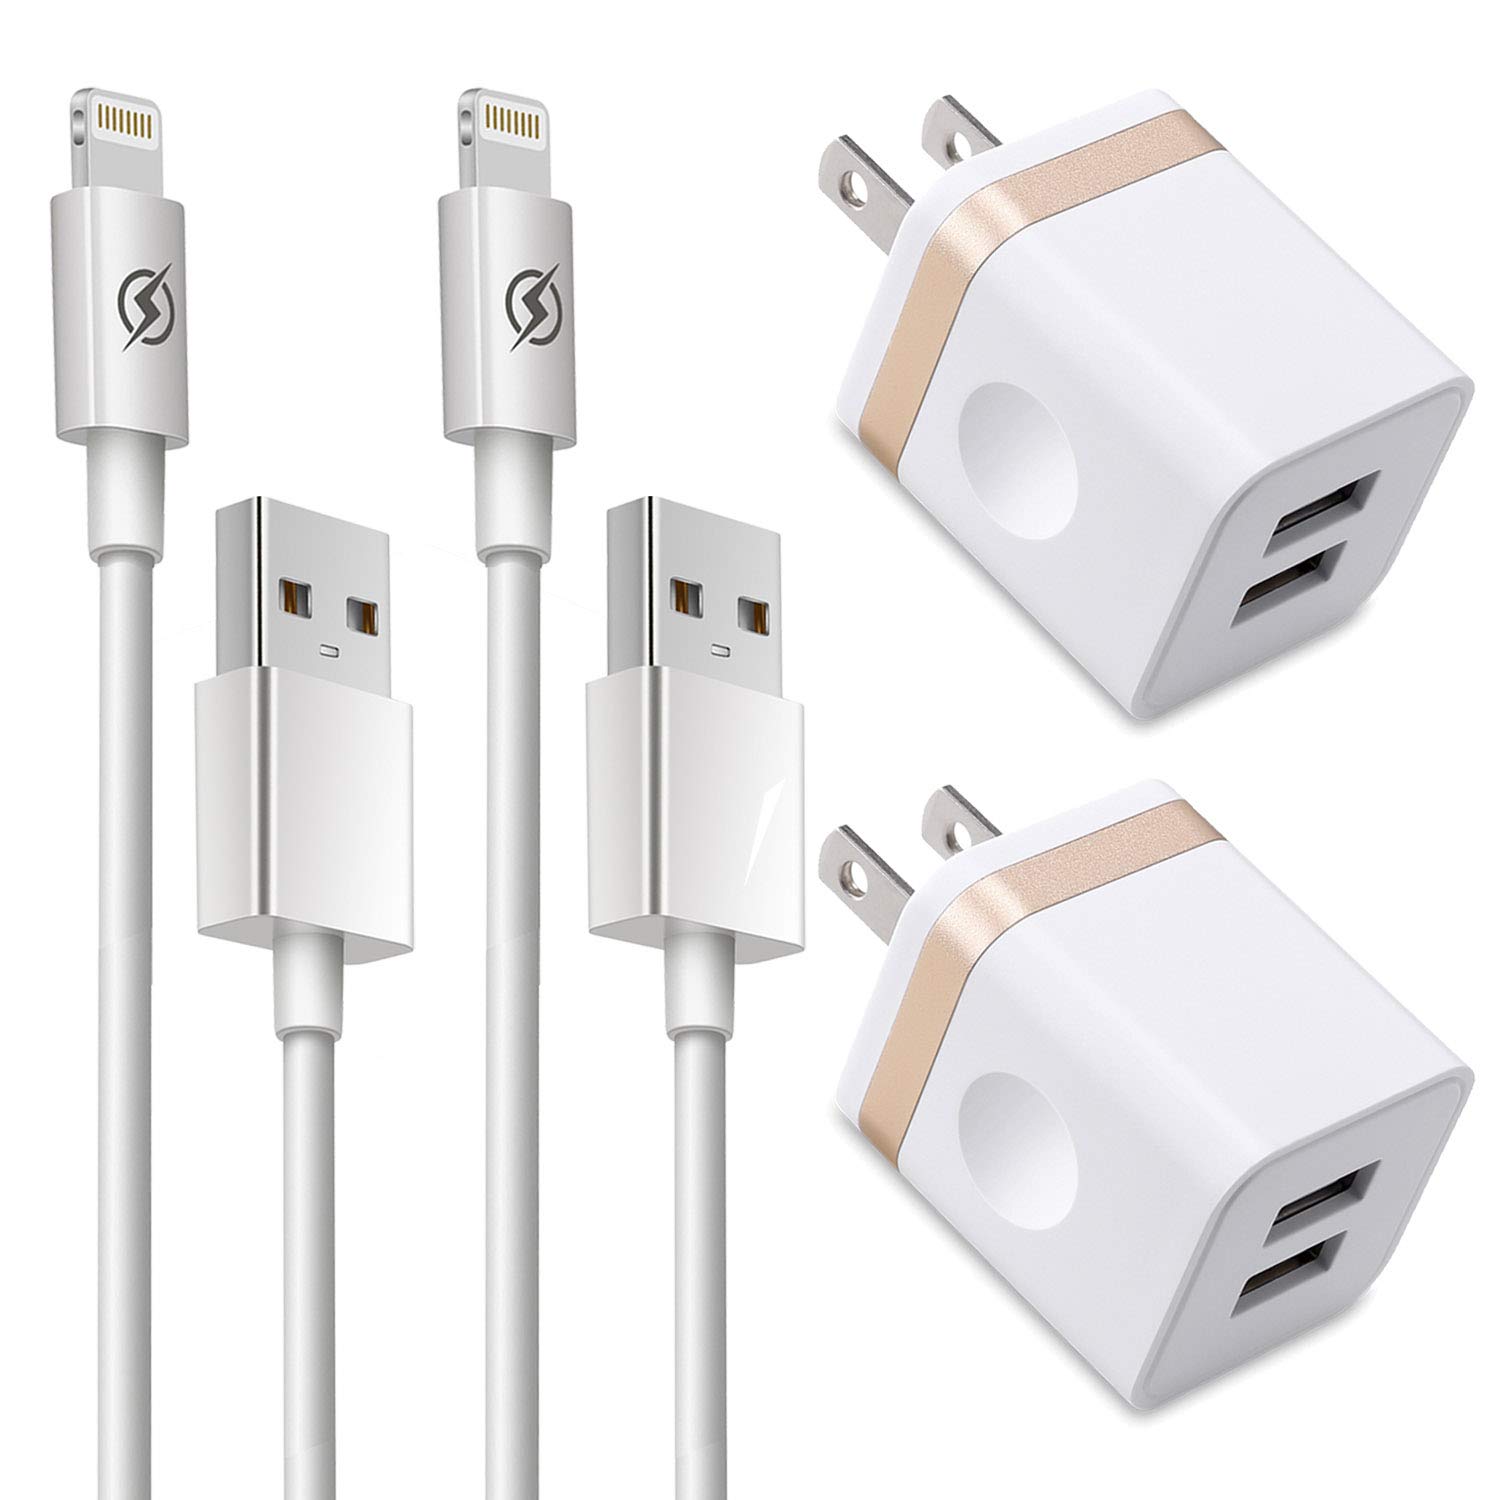 Phone Charger 6ft (4in1 Pack), DENWAN 6-Foot Flexible Charging/Sync USB Cable and 2.1A/5V Dual Port Wall Plug Adapter Compatible with Phone XS/XR/X 8/7/6/Plus SE/5S/5C (UL Certified) Gold